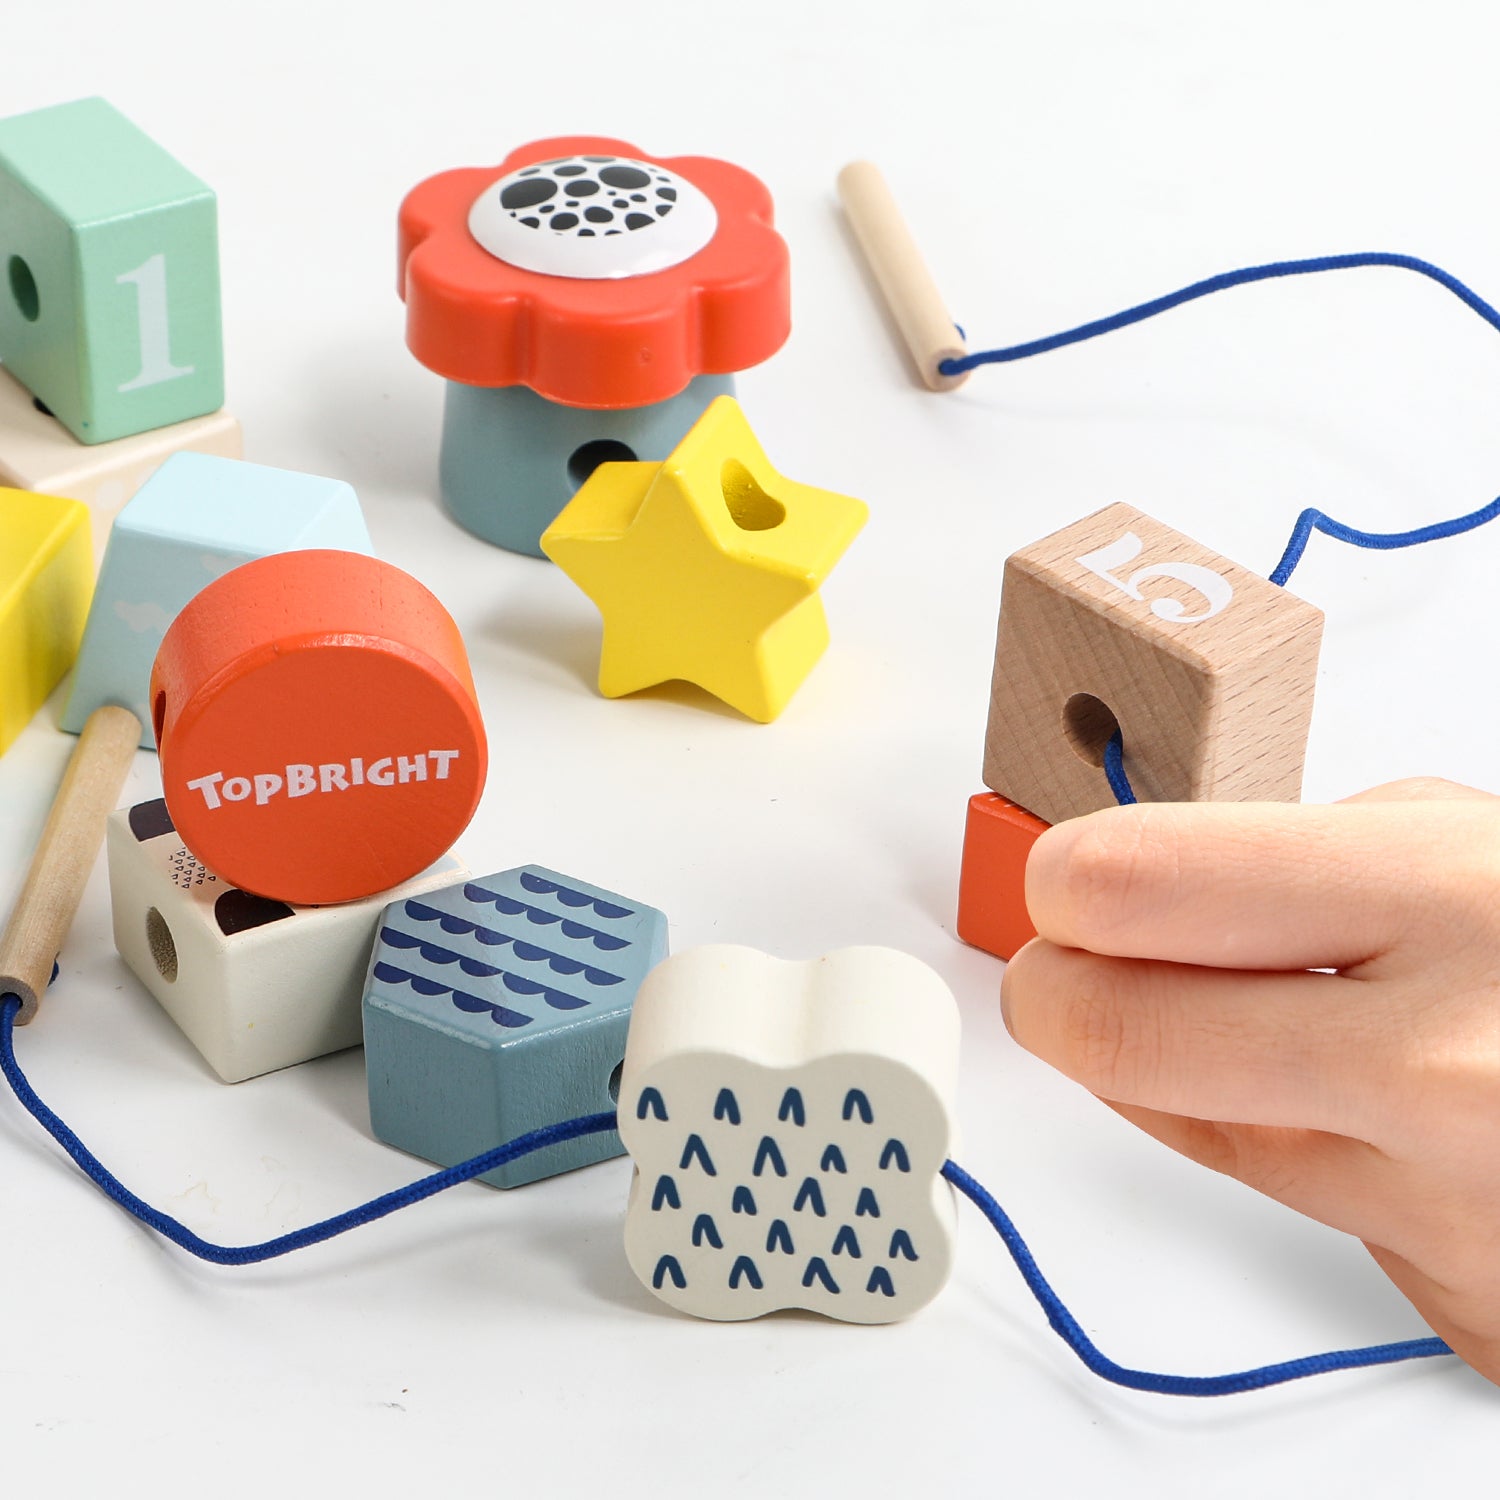 Versatile classic toy: With the fun Lacing Shapes Caterpillar, children aged 18 months and over thread colourful building blocks onto a cute caterpillar.  The colourful educational game convinces with colourful building blocks in many different shapes made of wood and all kinds of game variations.